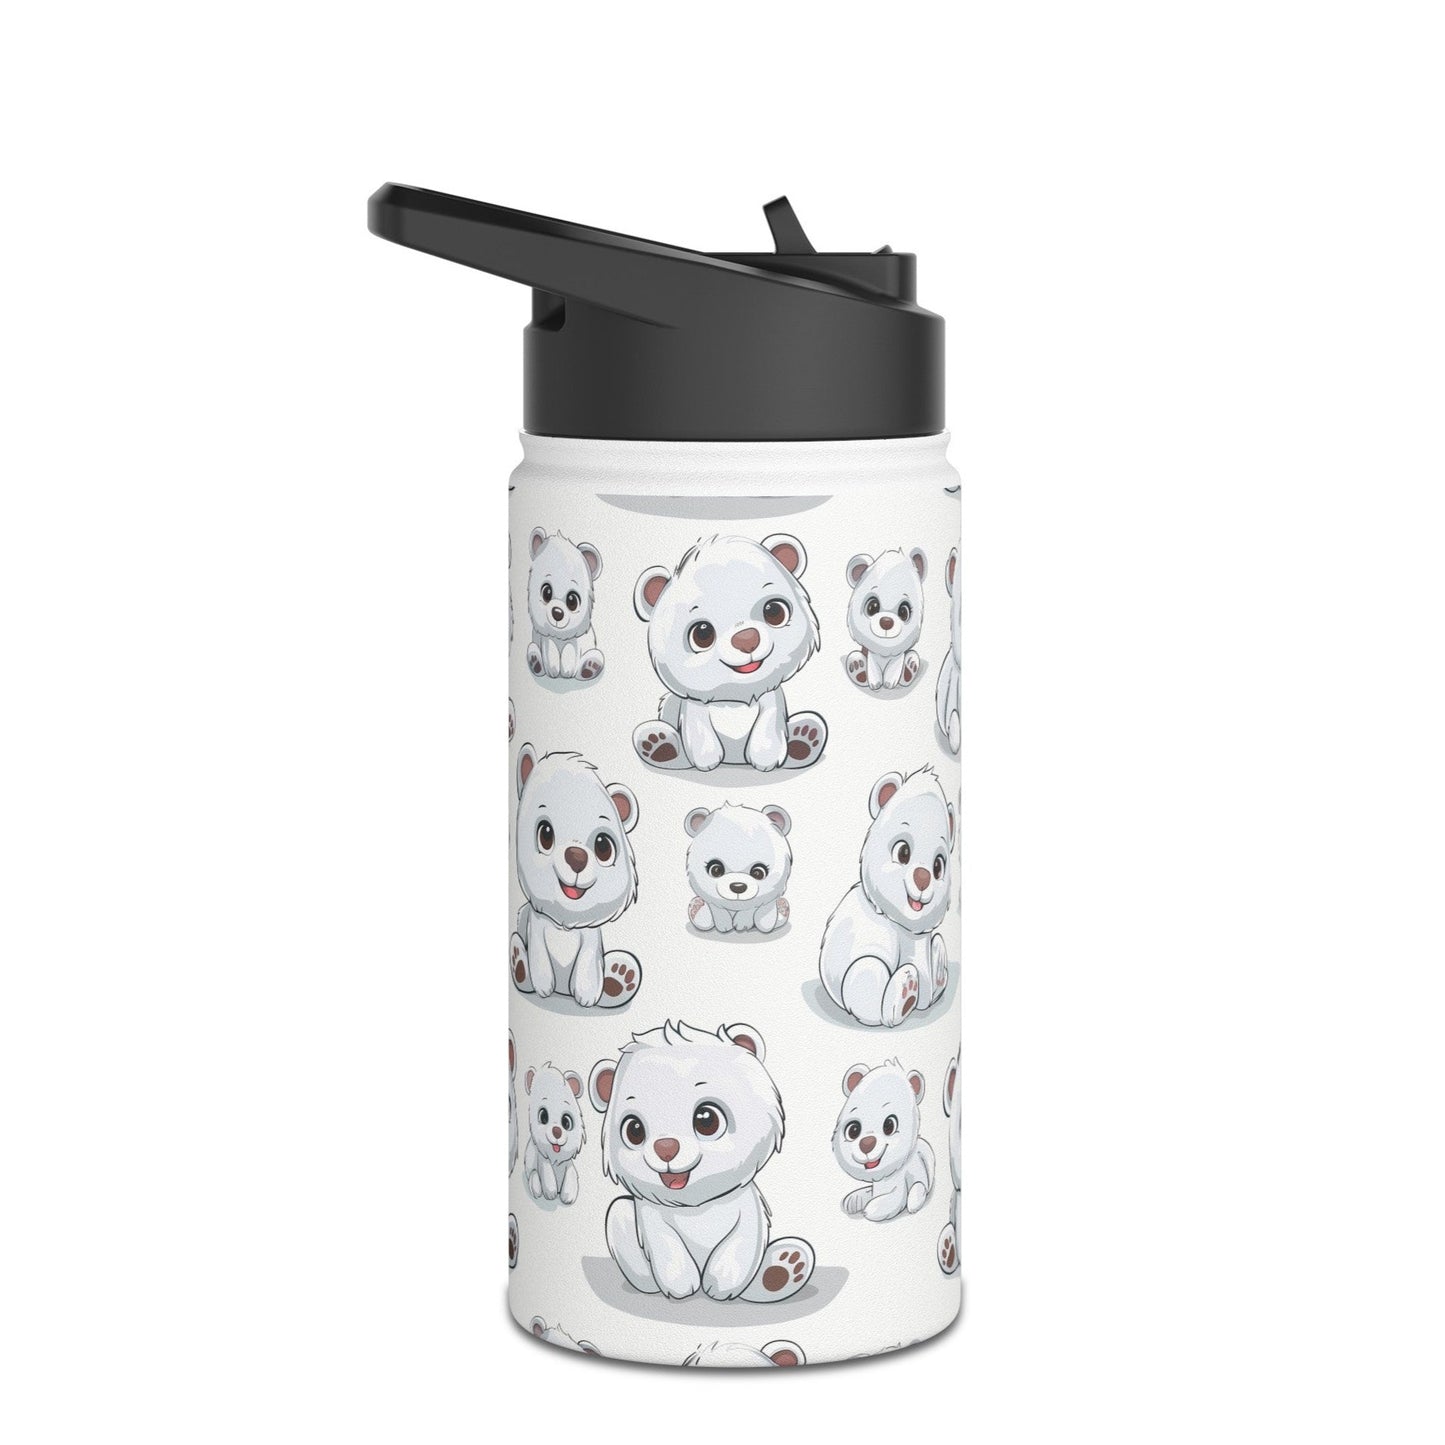 Insulated Water Bottle, 12oz, Cute Polar Bear Cubs - Double Walled Stainless Steel Thermos, Keeps Drinks Hot or Cold